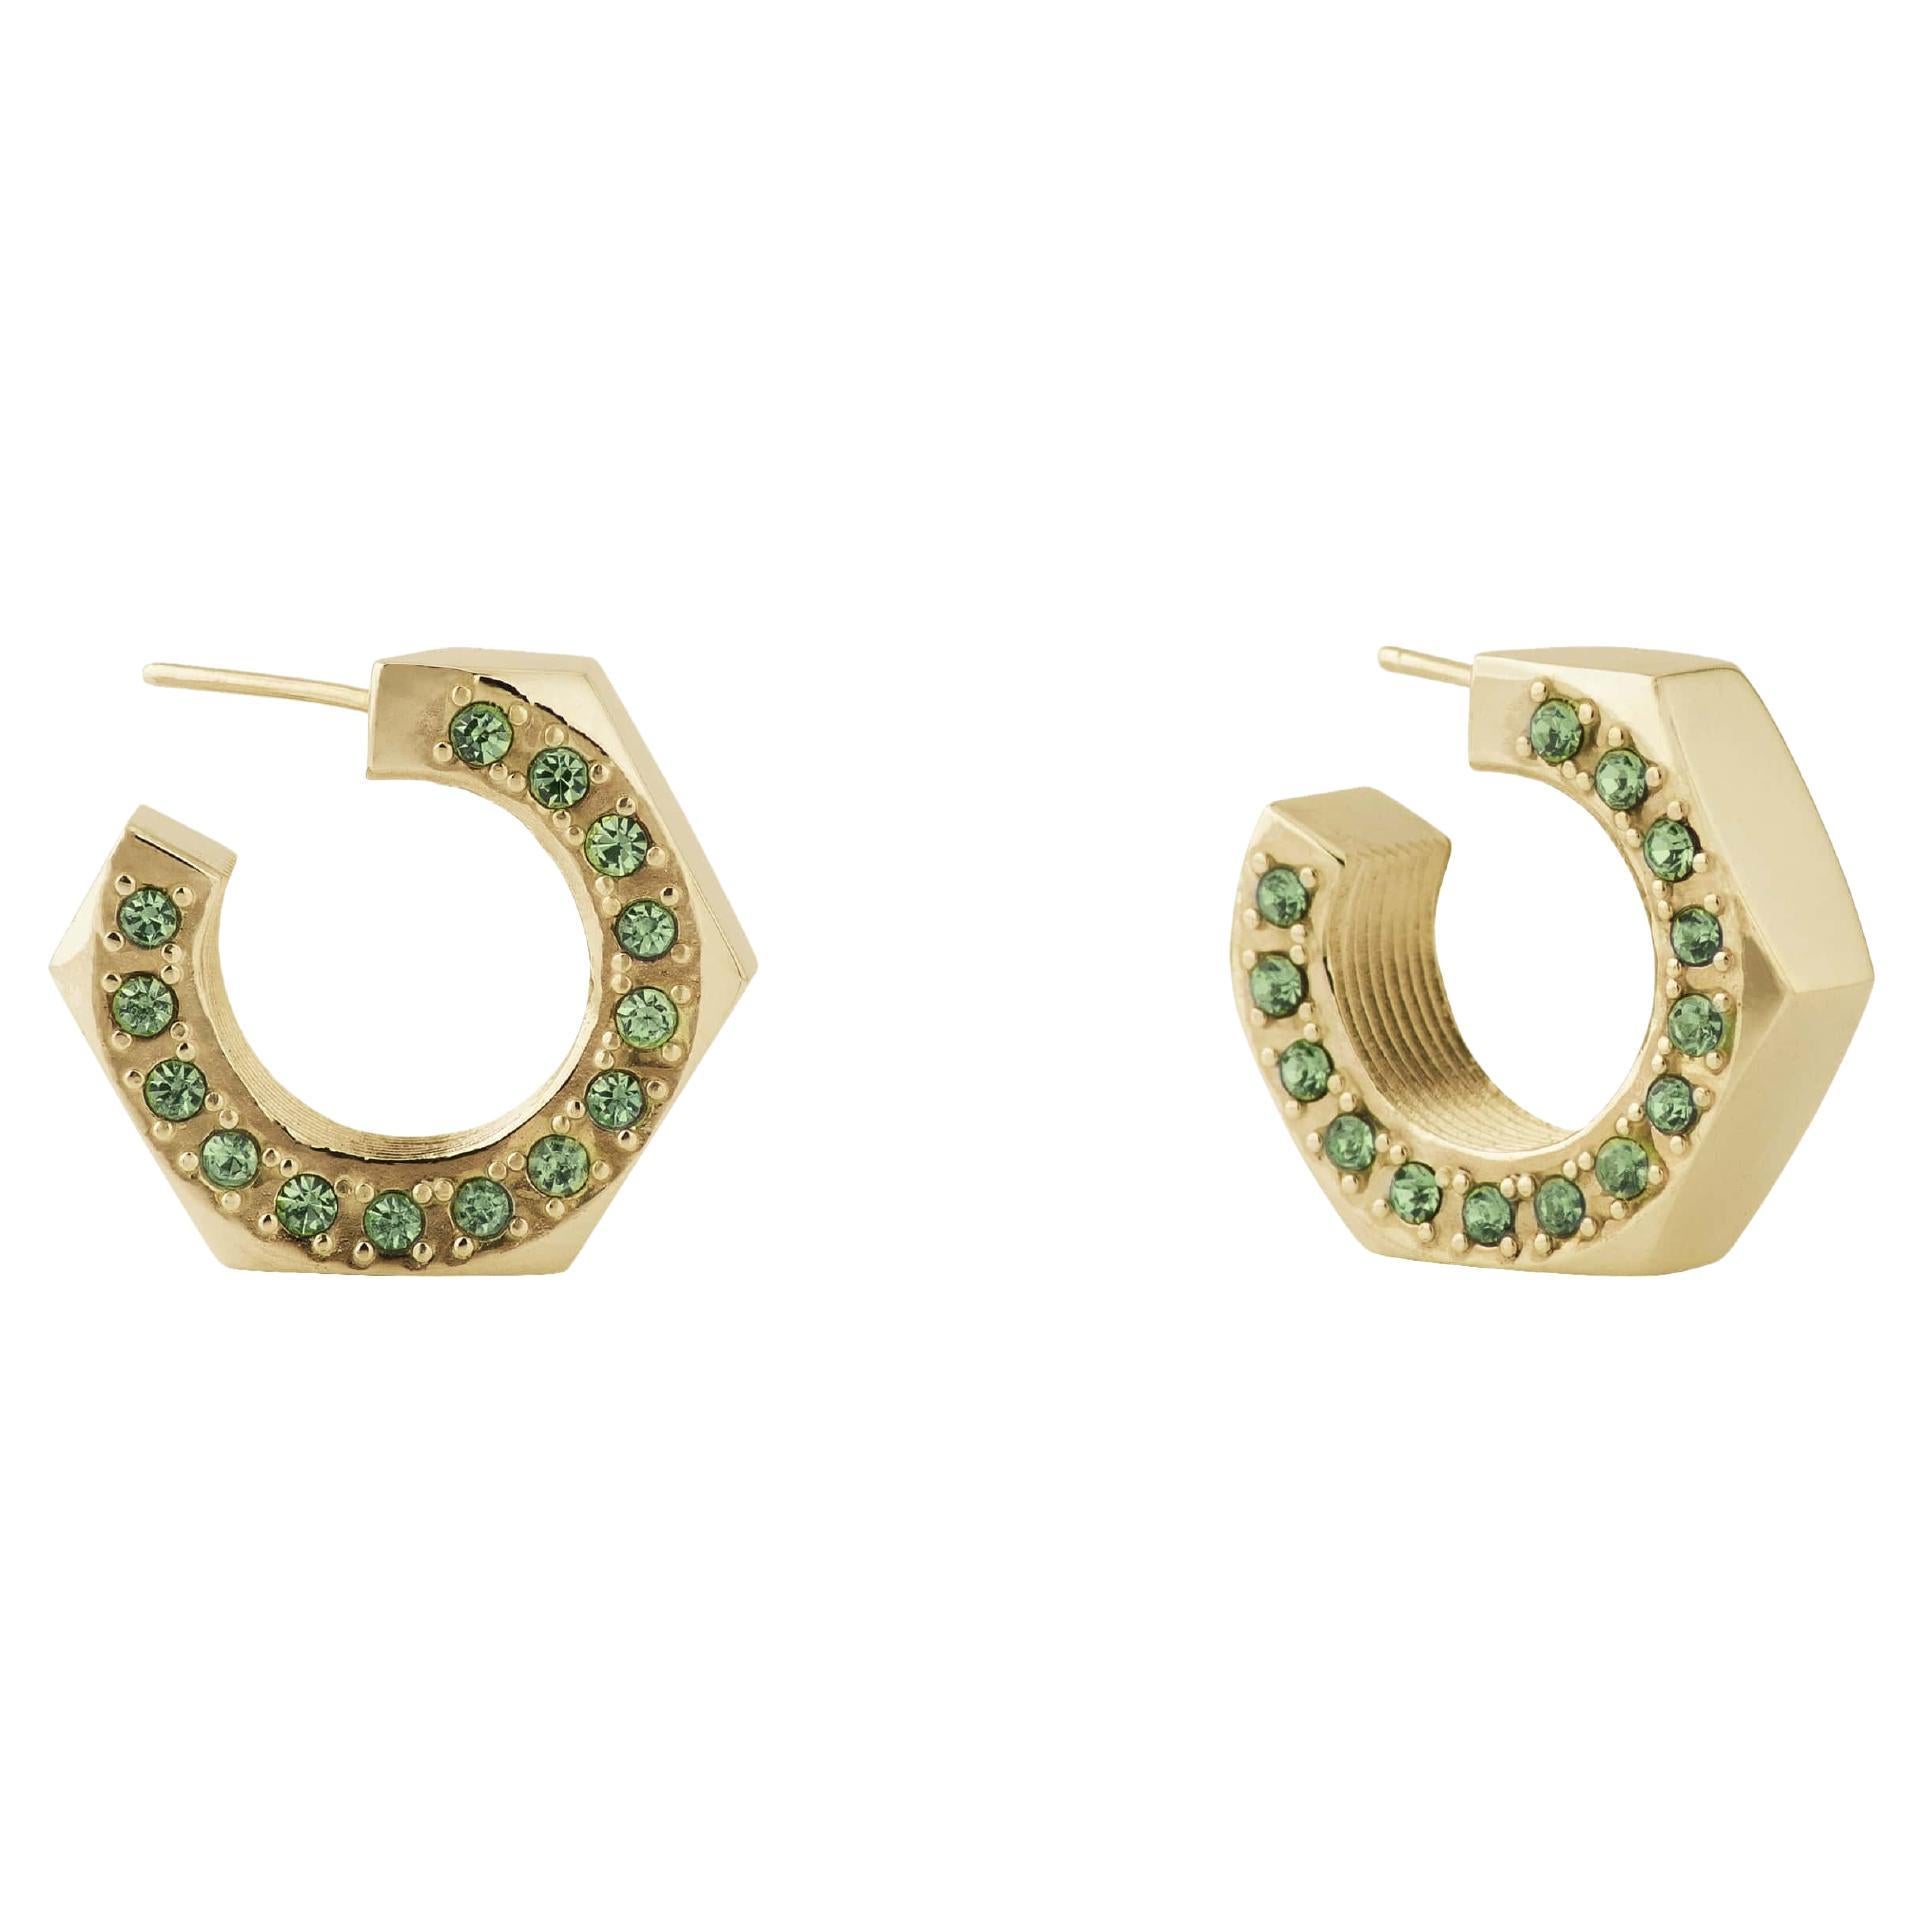 Big Gold Plated Silver Hoop Earrings with Natural Peridot Stones on the Side For Sale